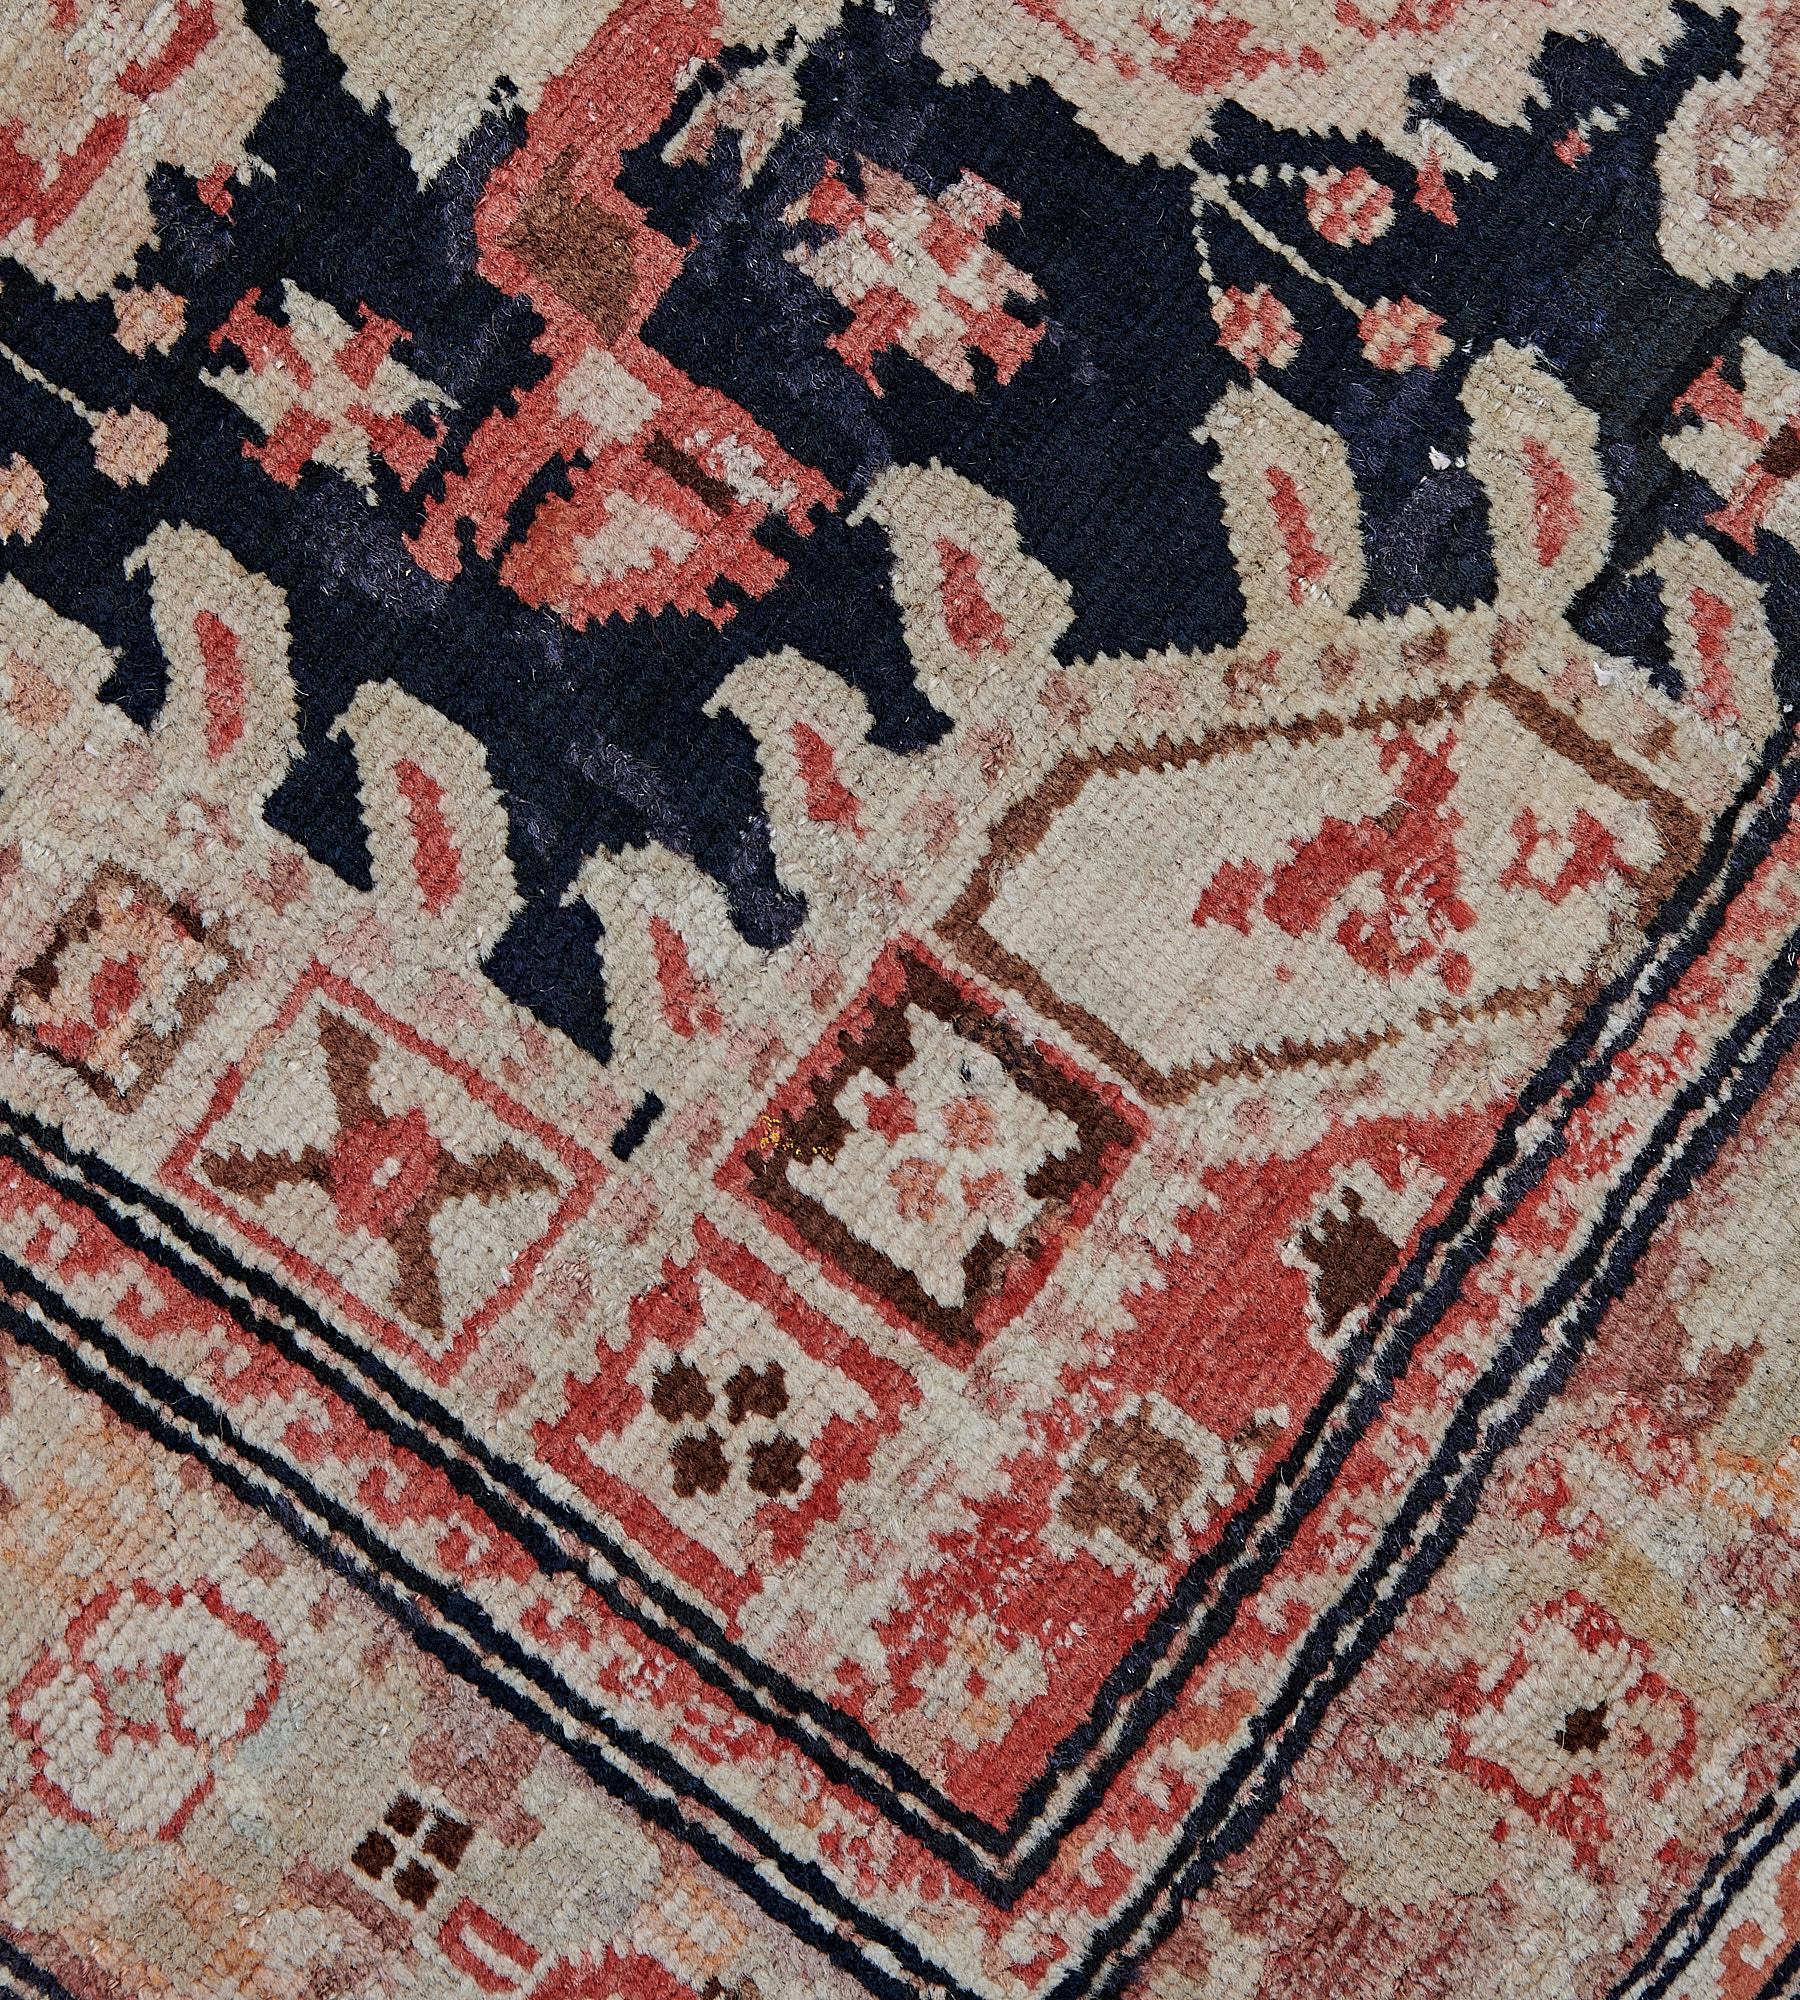 Hand-Knotted Antique Circa-1900 Karabah Runner In Good Condition For Sale In West Hollywood, CA